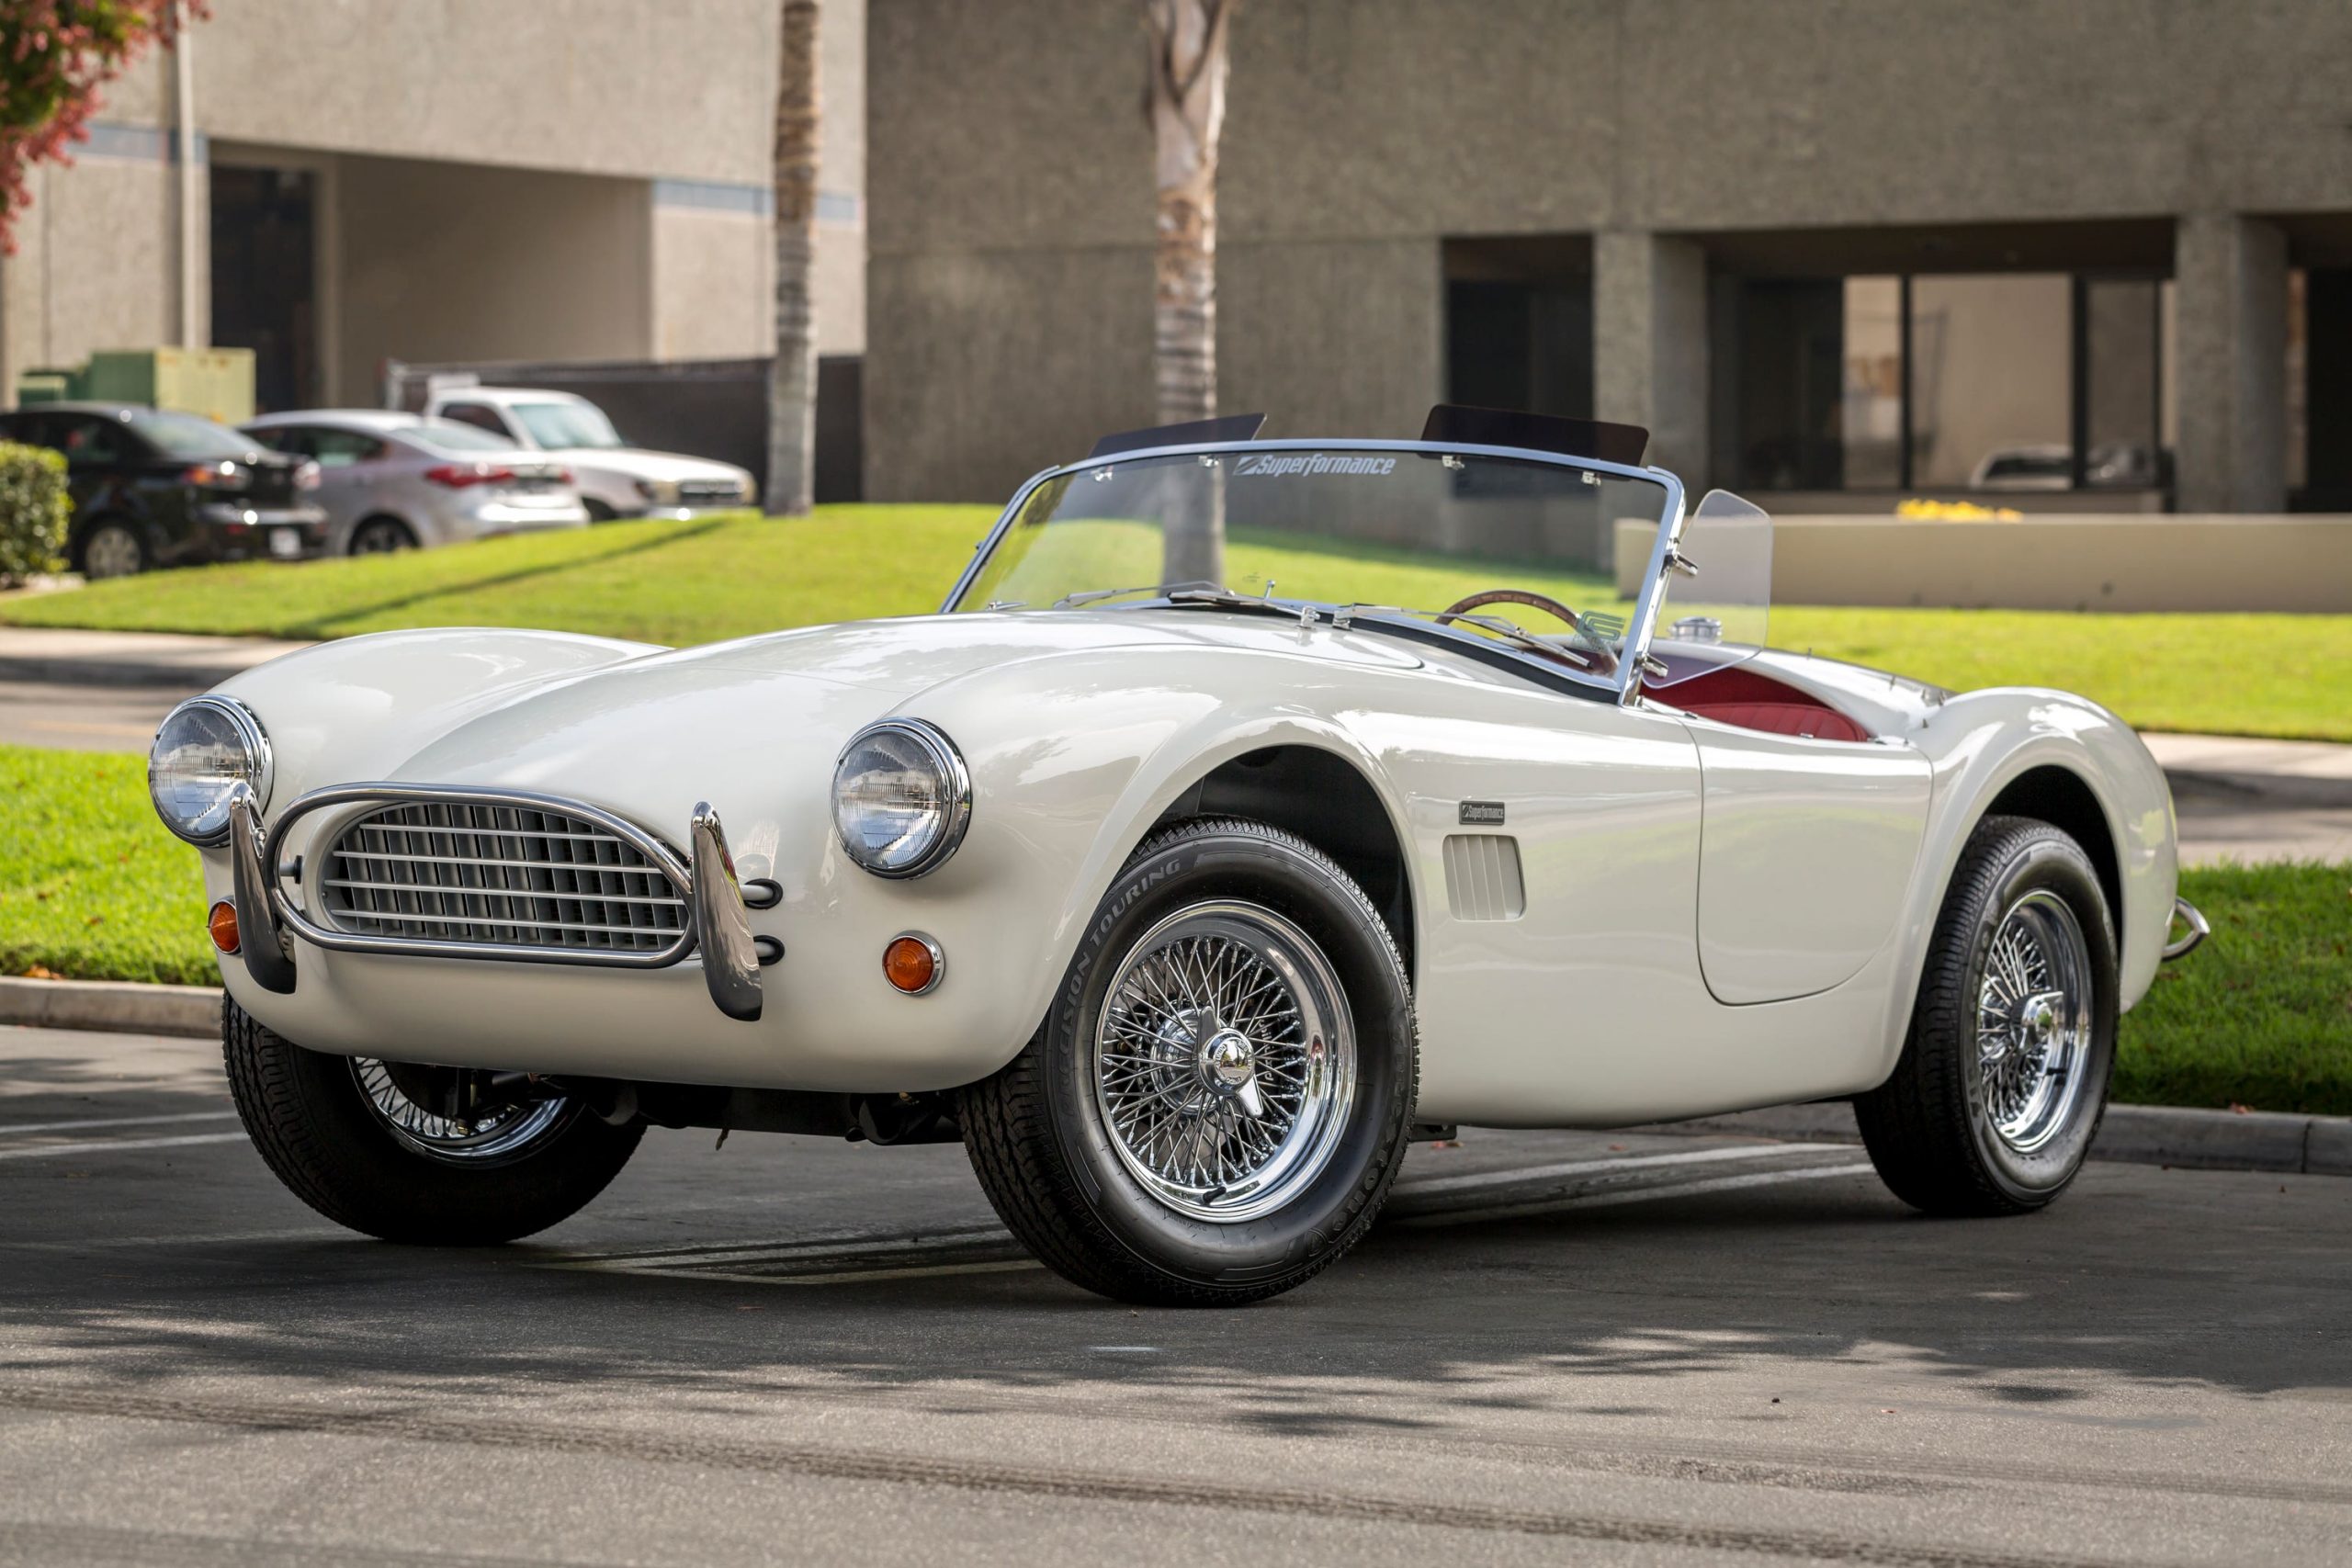 A cream Shelby Cobra continuation car from Superperformance